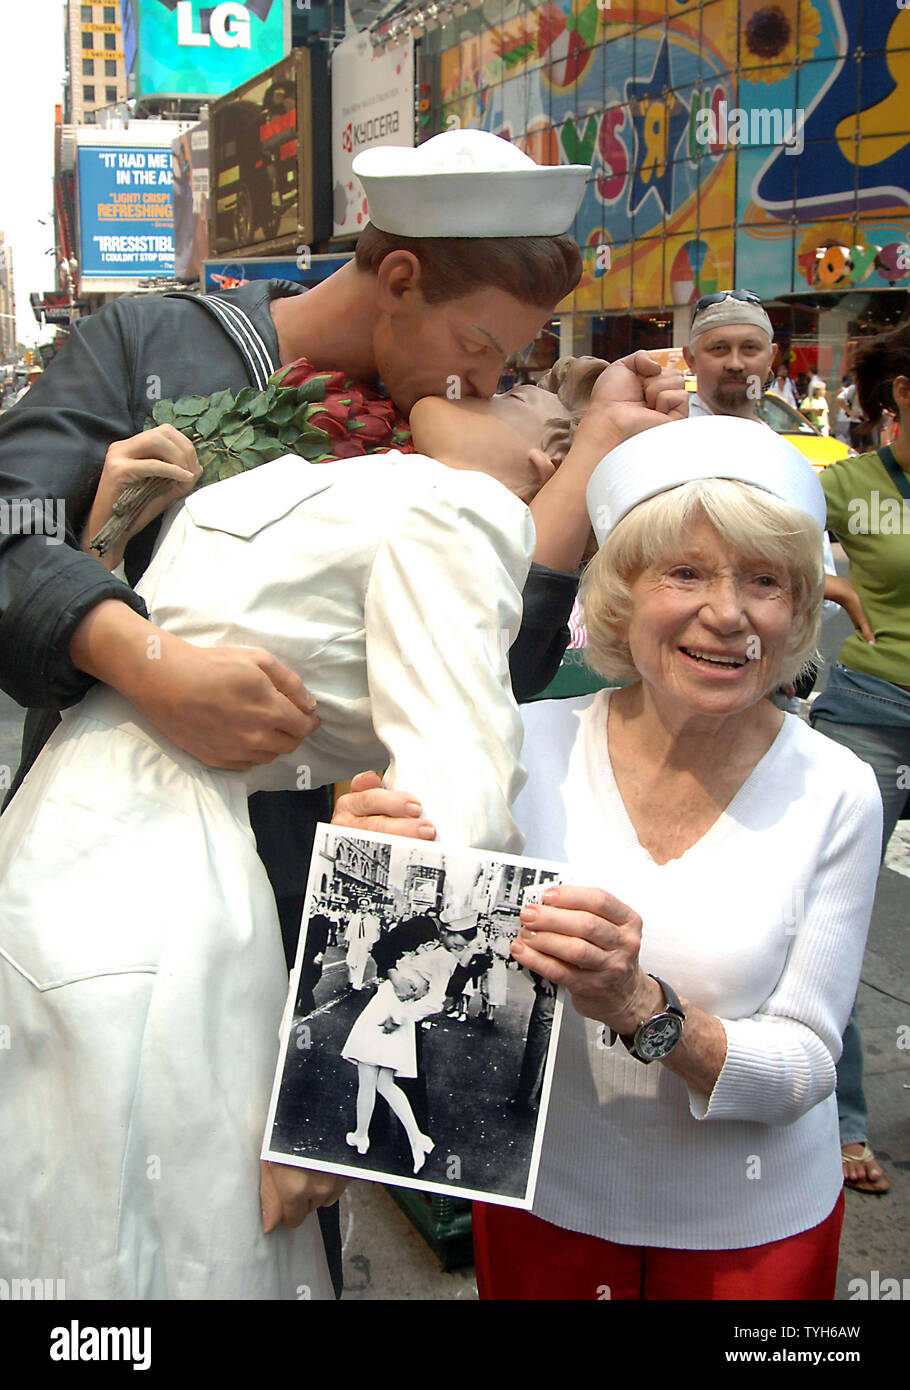 86 year old Edith Shain, the original nurse in the 1945 VJ Day photo made in New York's Times Square, returns to Times Square to take part on August 11, 2005 in the unveiling of  the sculpture'Unconditional Surrender' by J.Seward Johnson which celebrates that moment in time. Ms. Shain will reunite on August 14th with the salior who kissed her Carl Muscarello on that day 60 years ago when World War 11 officially ended.  (UPI Photo/Ezio Petersen) Stock Photo